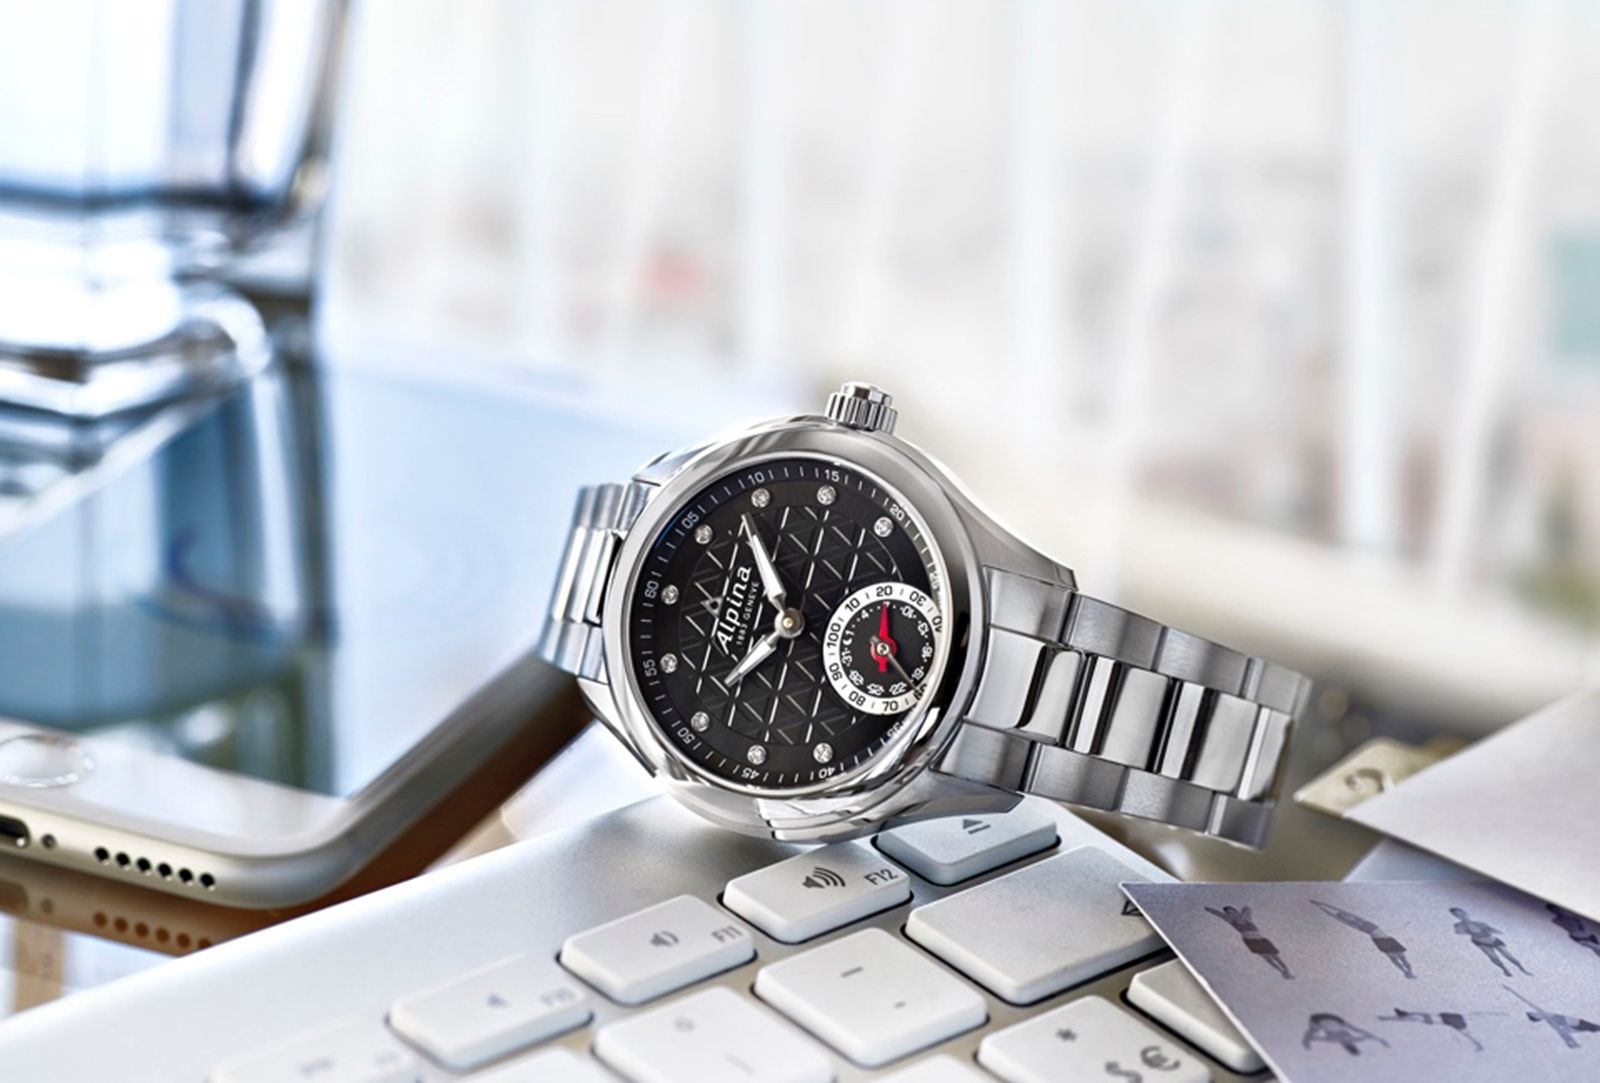 alpina horological smartwatch to take on withings activité at analogue activity tracking image 1